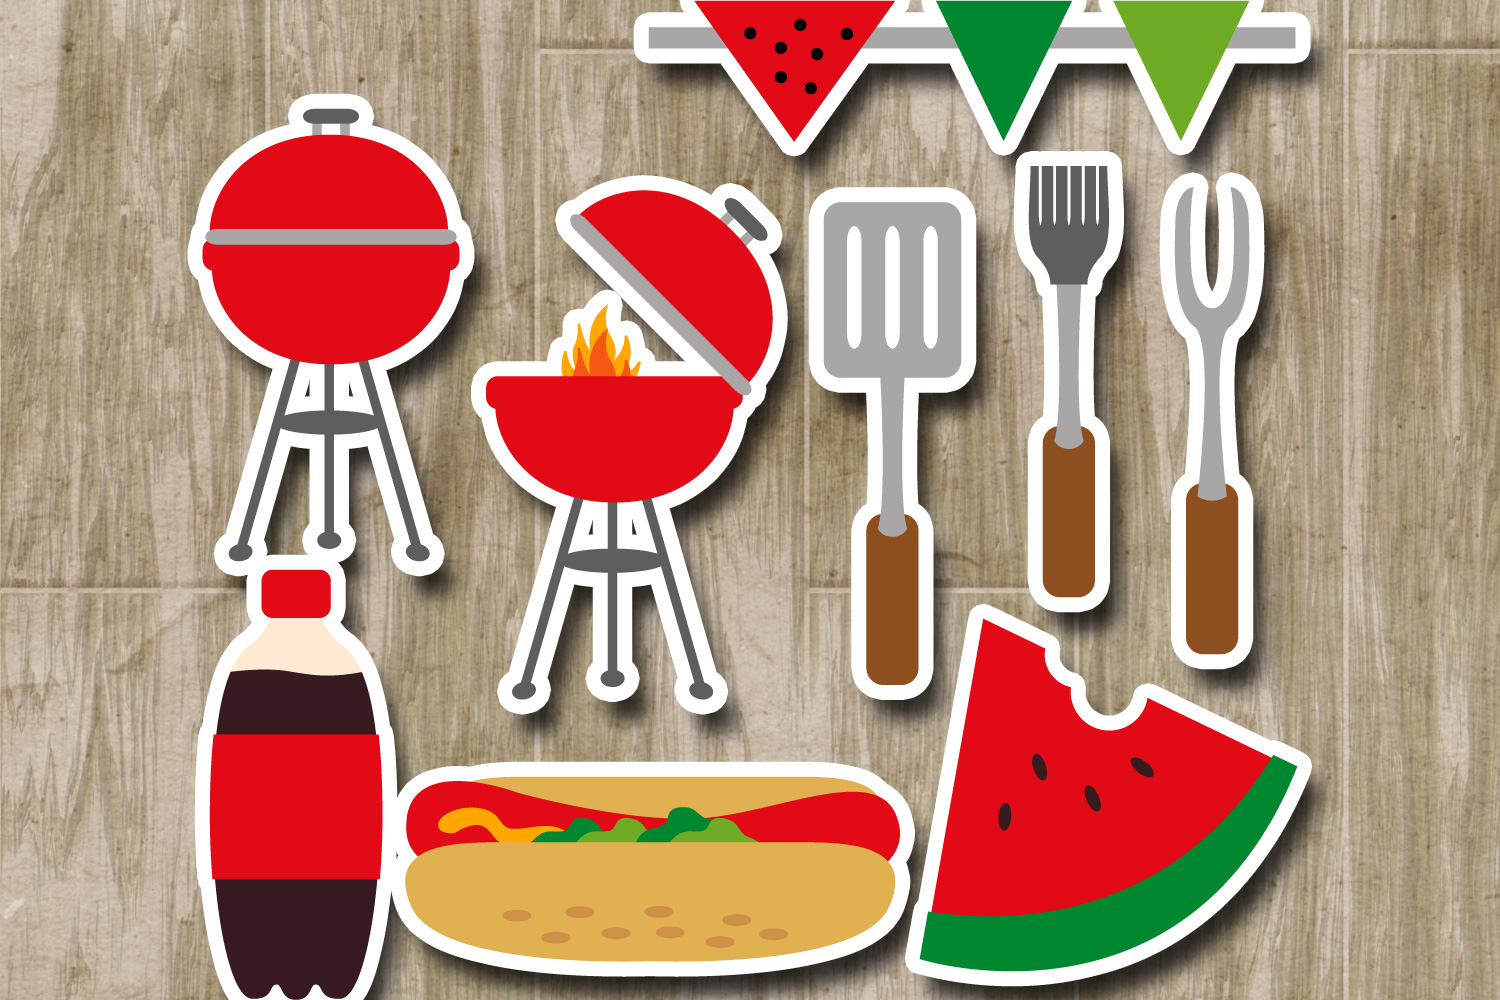 Summer Barbecue party clipart - BBQ grill clip art example image 2.